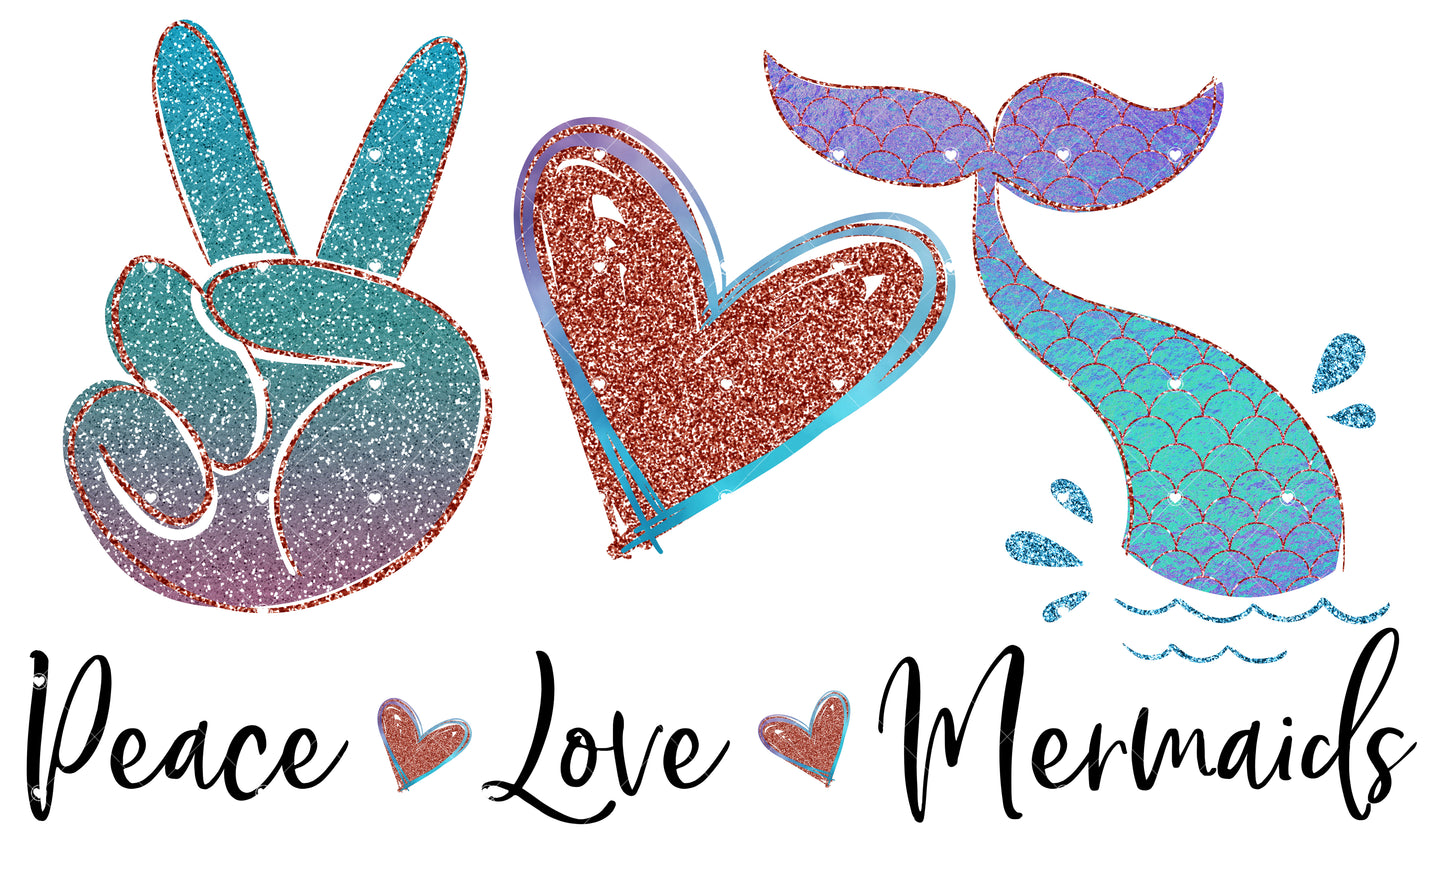 Peace Love Mermaids Ready To Press Sublimation Transfer